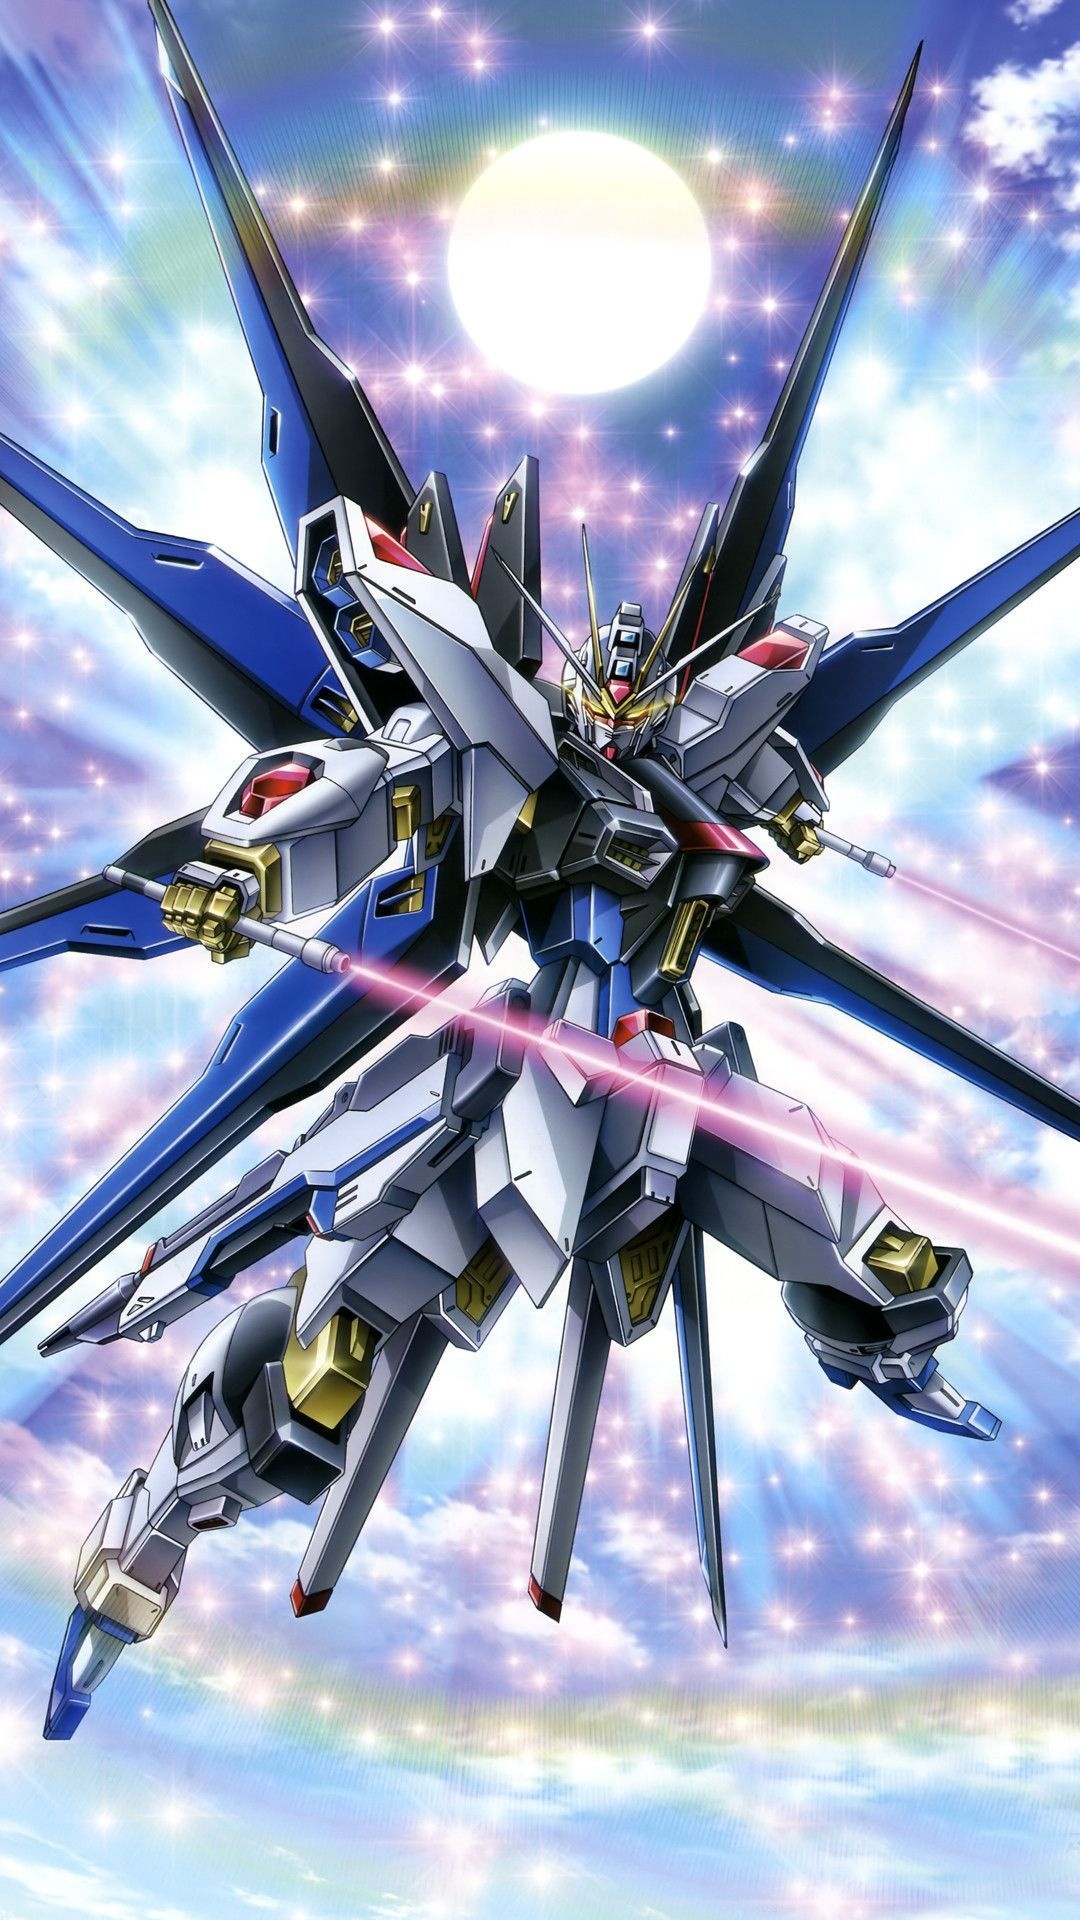 Gundam creative graphics, Artistic anime images, HD photos, Android/iPhone wallpapers, 1080x1920 Full HD Phone